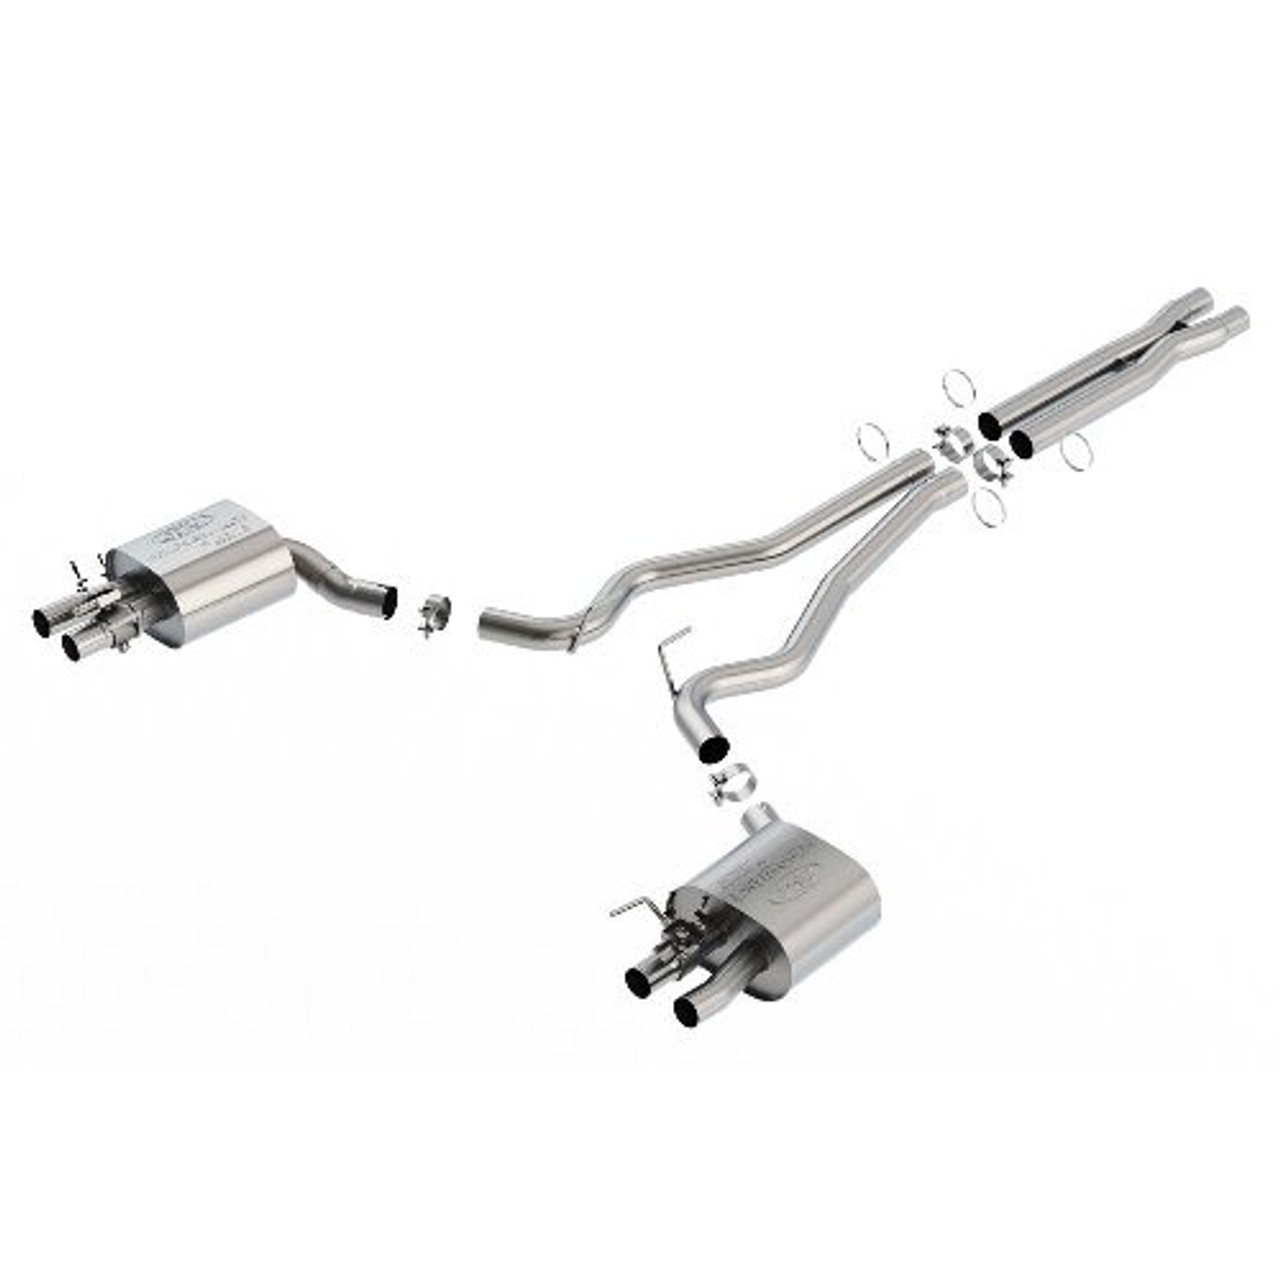 BORLA® Performance Exhaust System: Active Performance for Electric